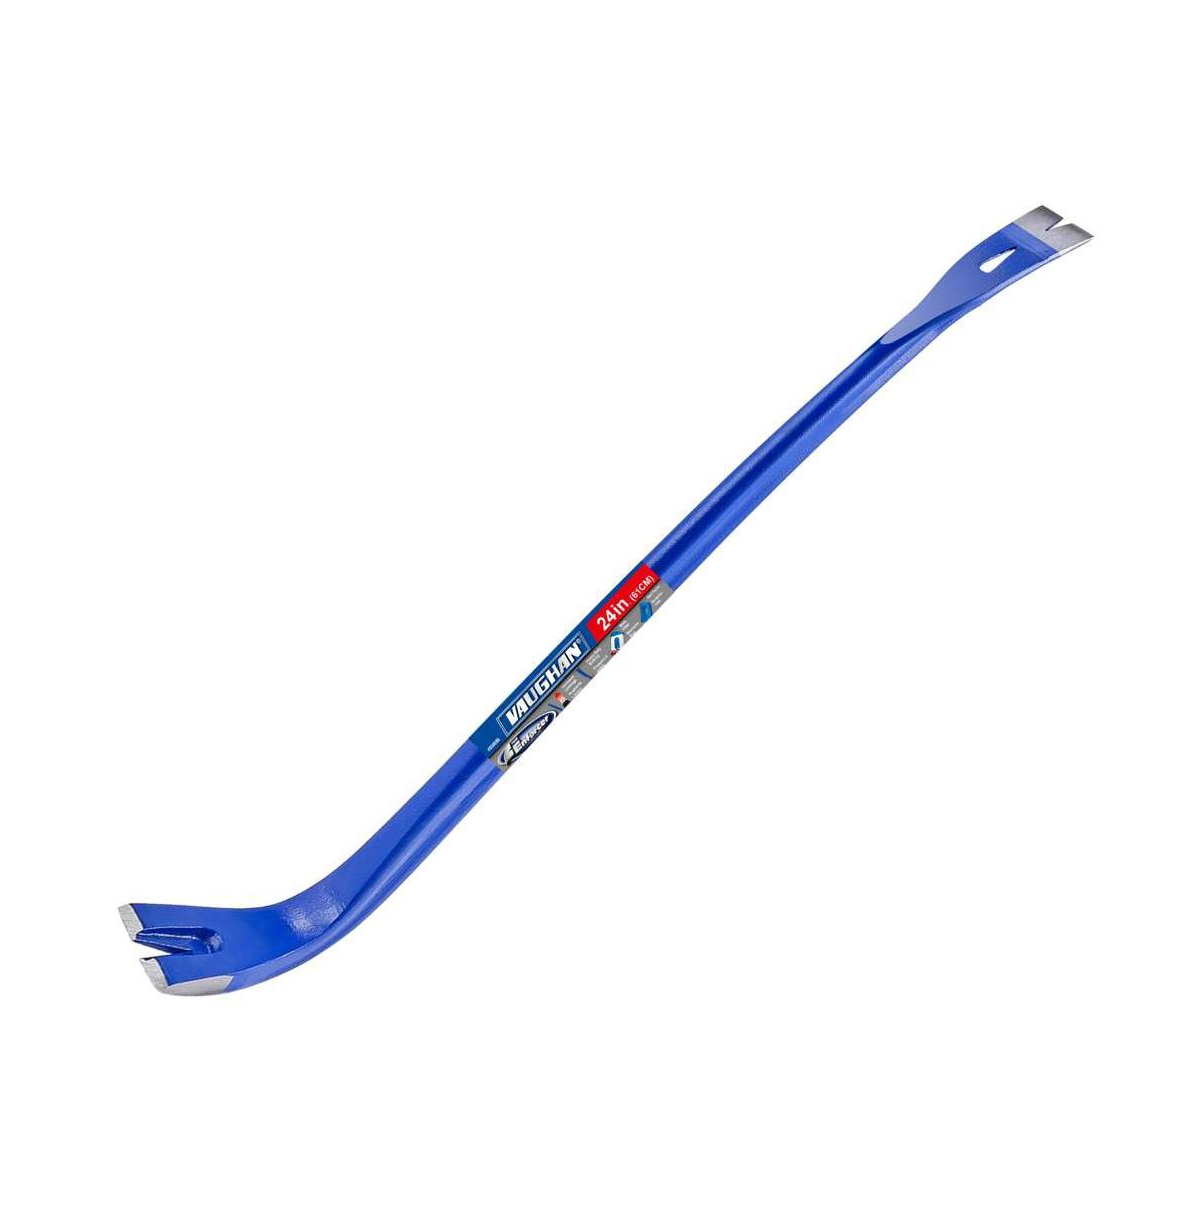 24 Inch Pry Crow Bar with Nail Puller and Curved Handle - Blue